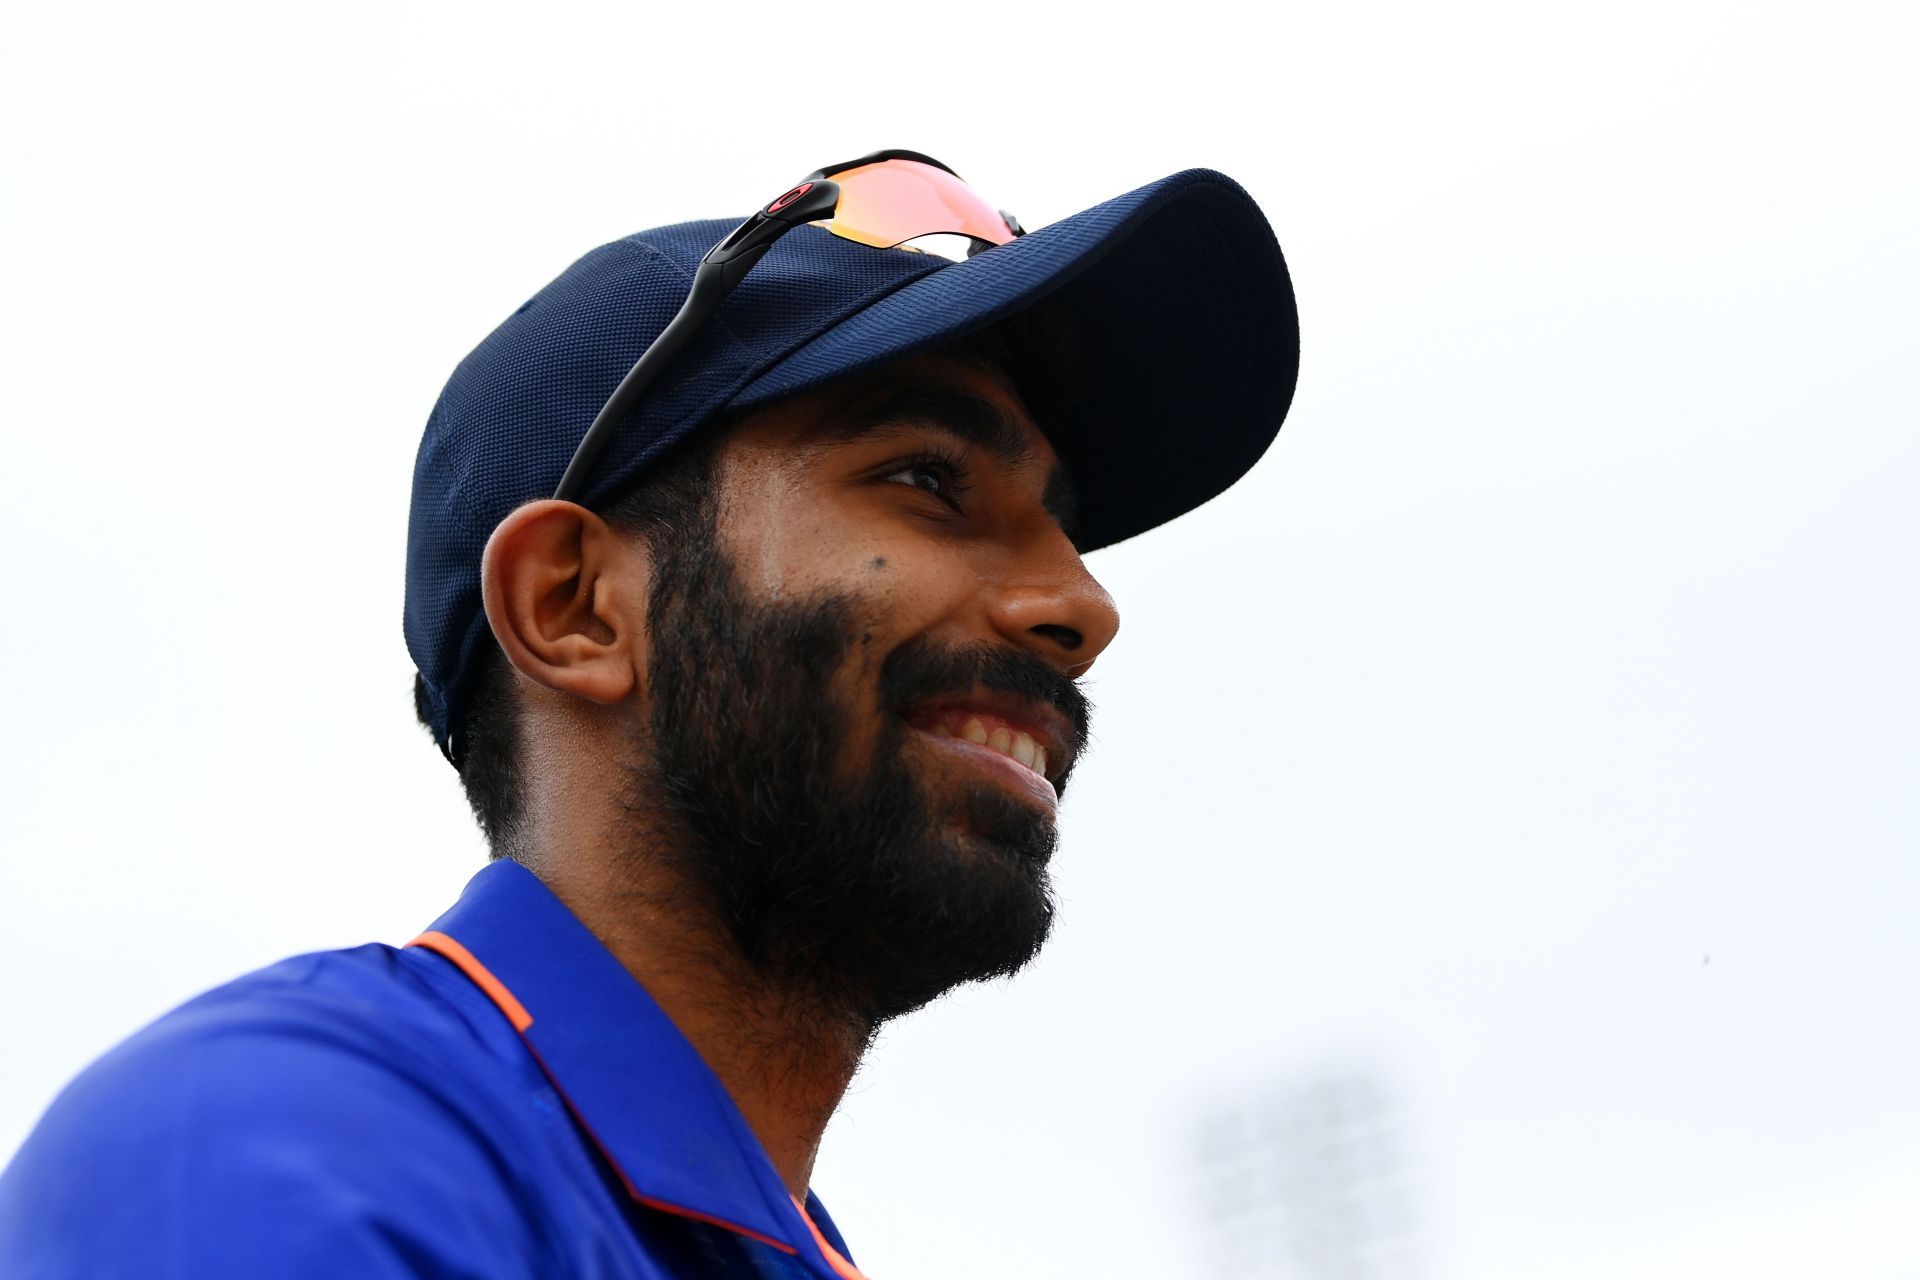 Jasprit Bumrah will played his last T20I in 2022 [Getty Images]